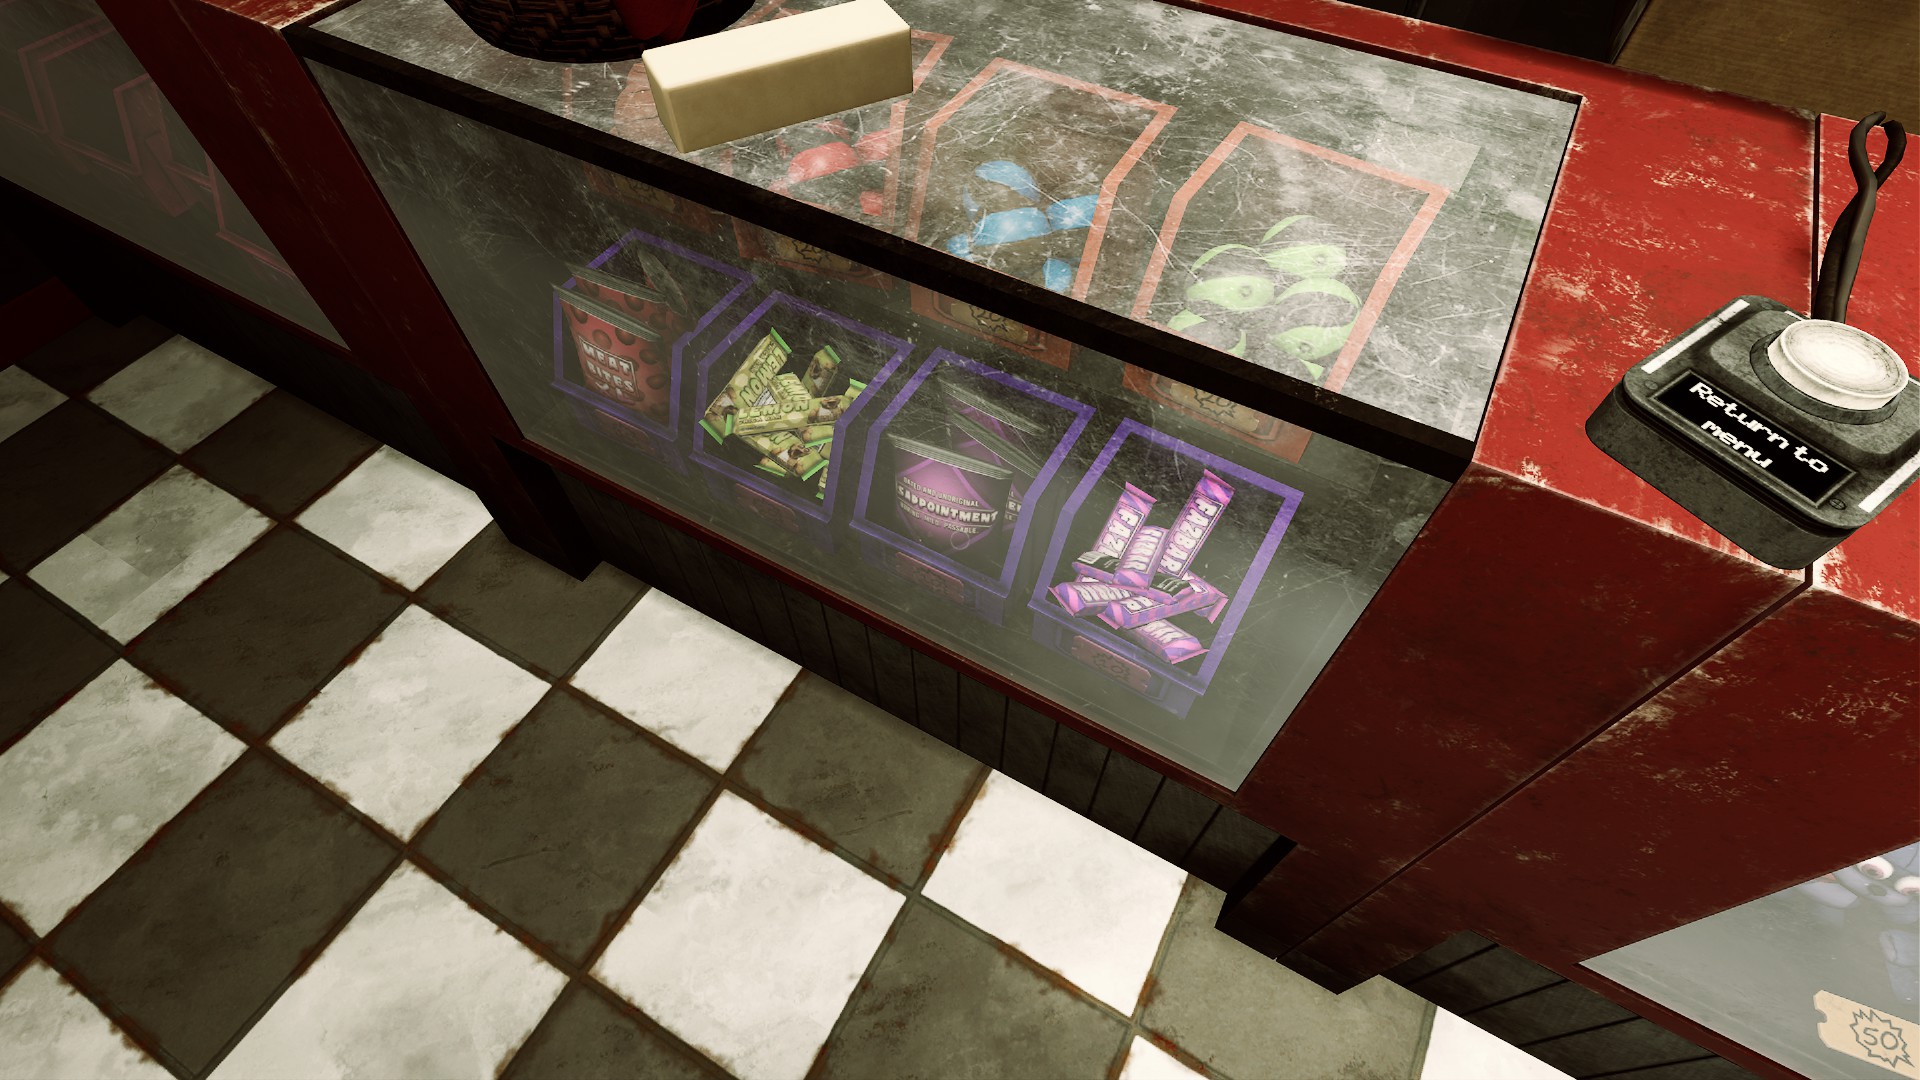 FIVE NIGHTS AT FREDDY'S: HELP WANTED Location for each tape on flat mode - Non VR - Locations - 8CDA4CF